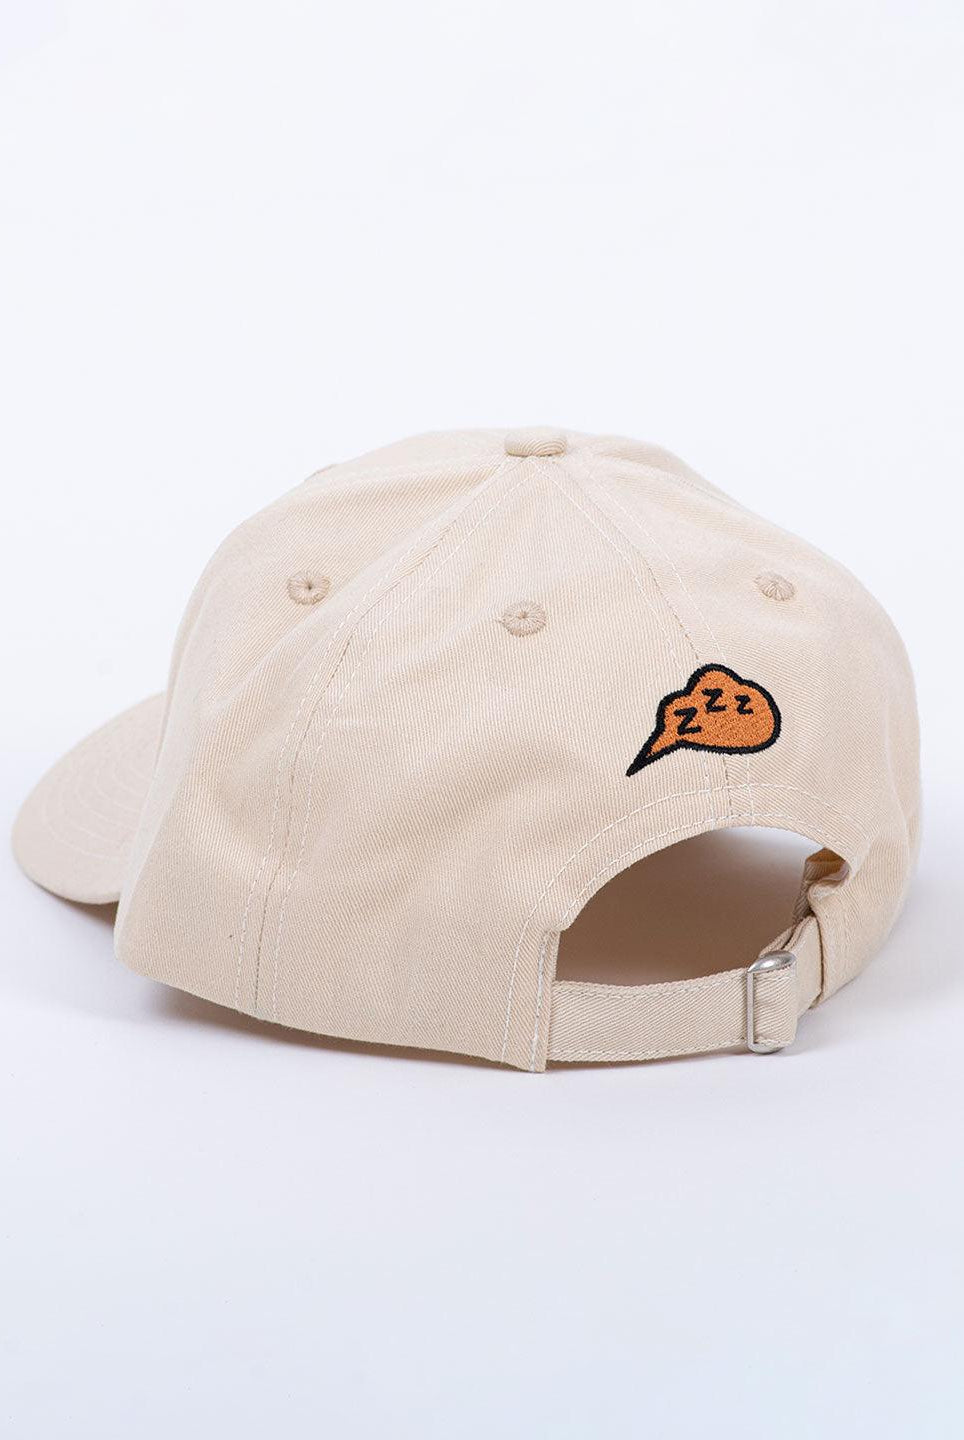 It'S Too A.M. For Me Embroidered Off-White Free Size Unisex Baseball Caps - Tistabene